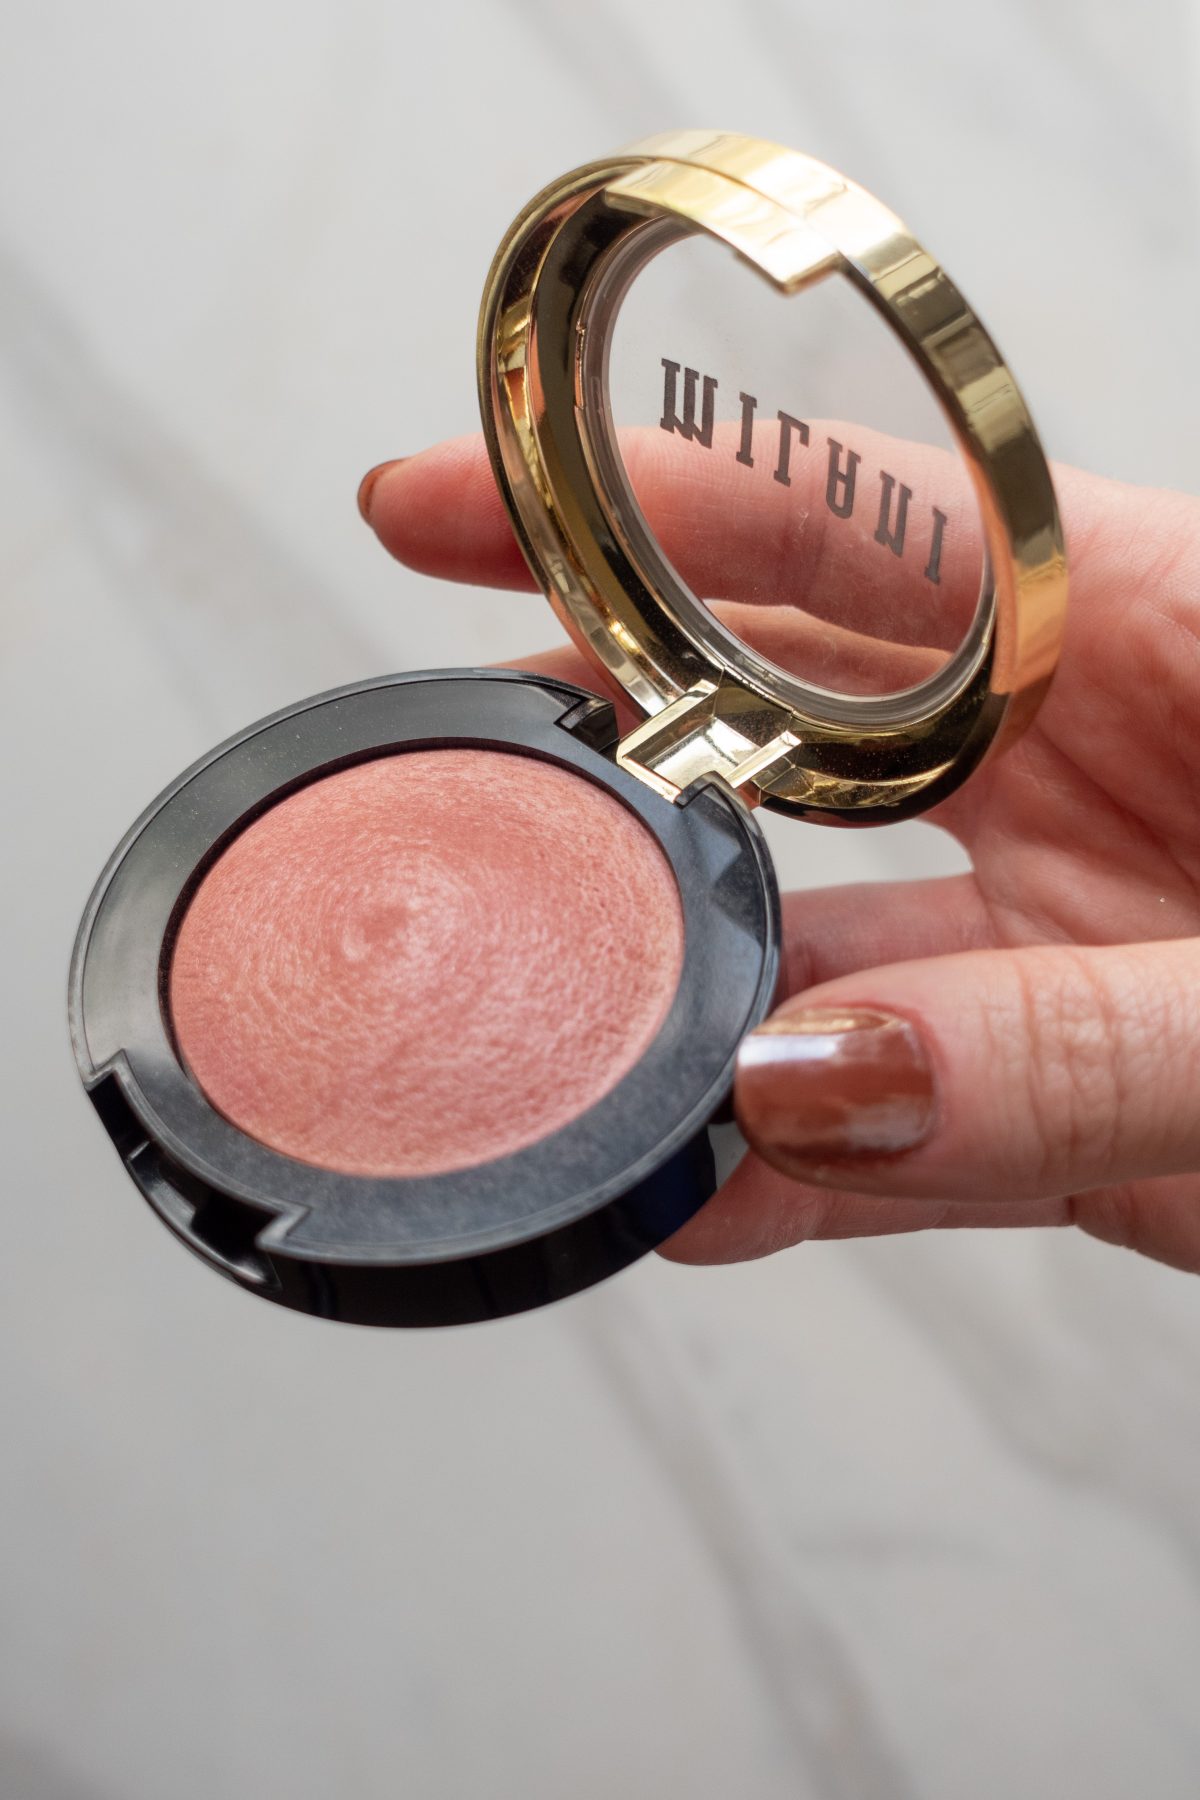 Milani Baked Blush Review and Swatches - Petal Primavera